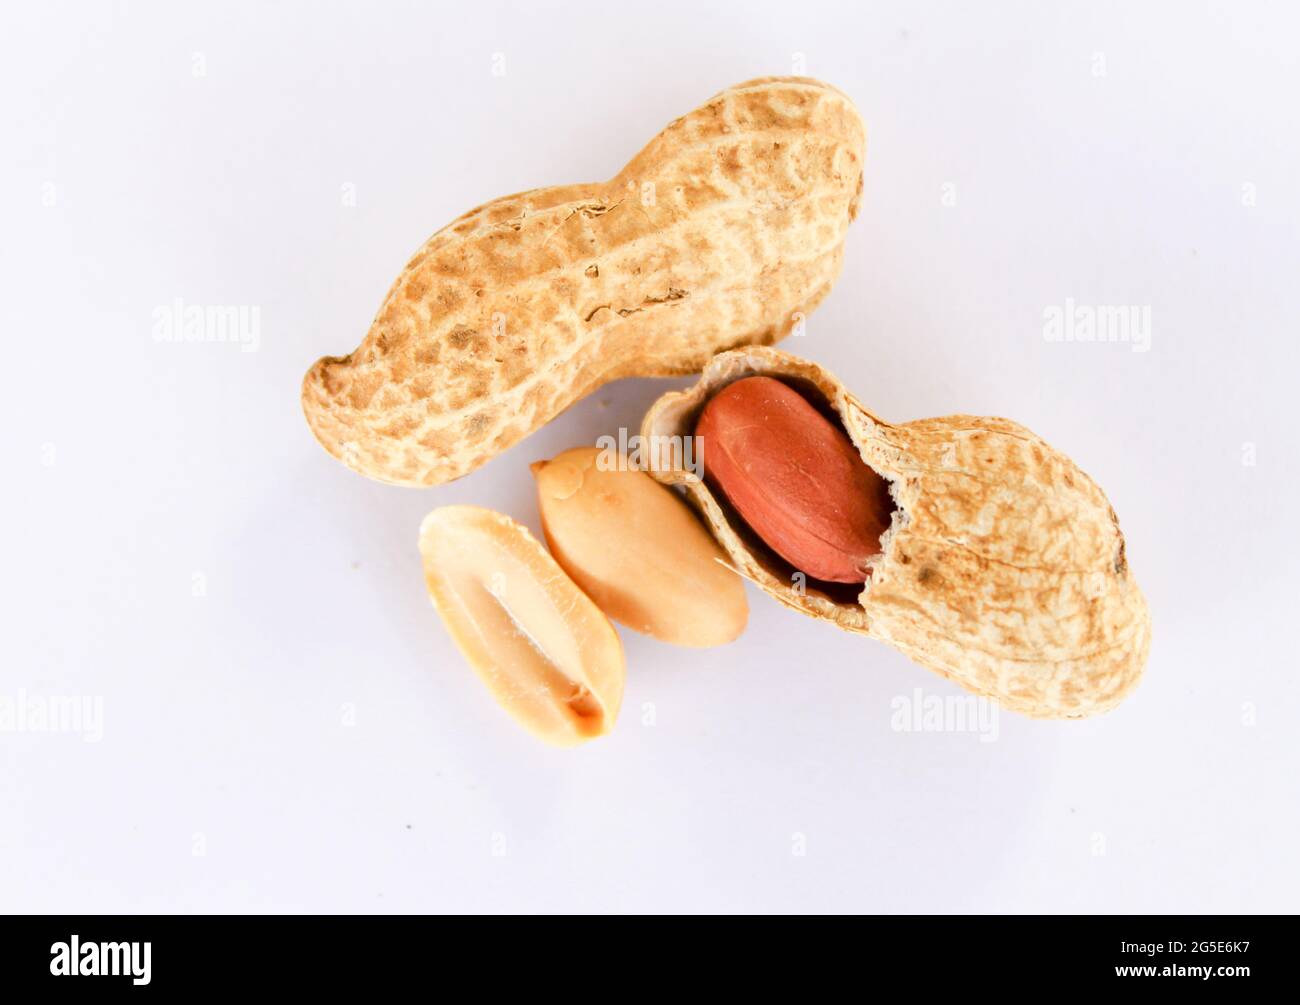 Top view of peanuts on a white background. Peanuts are shelled to reveal red seeds inside. There was a seed that had been removed on the side. Stock Photo